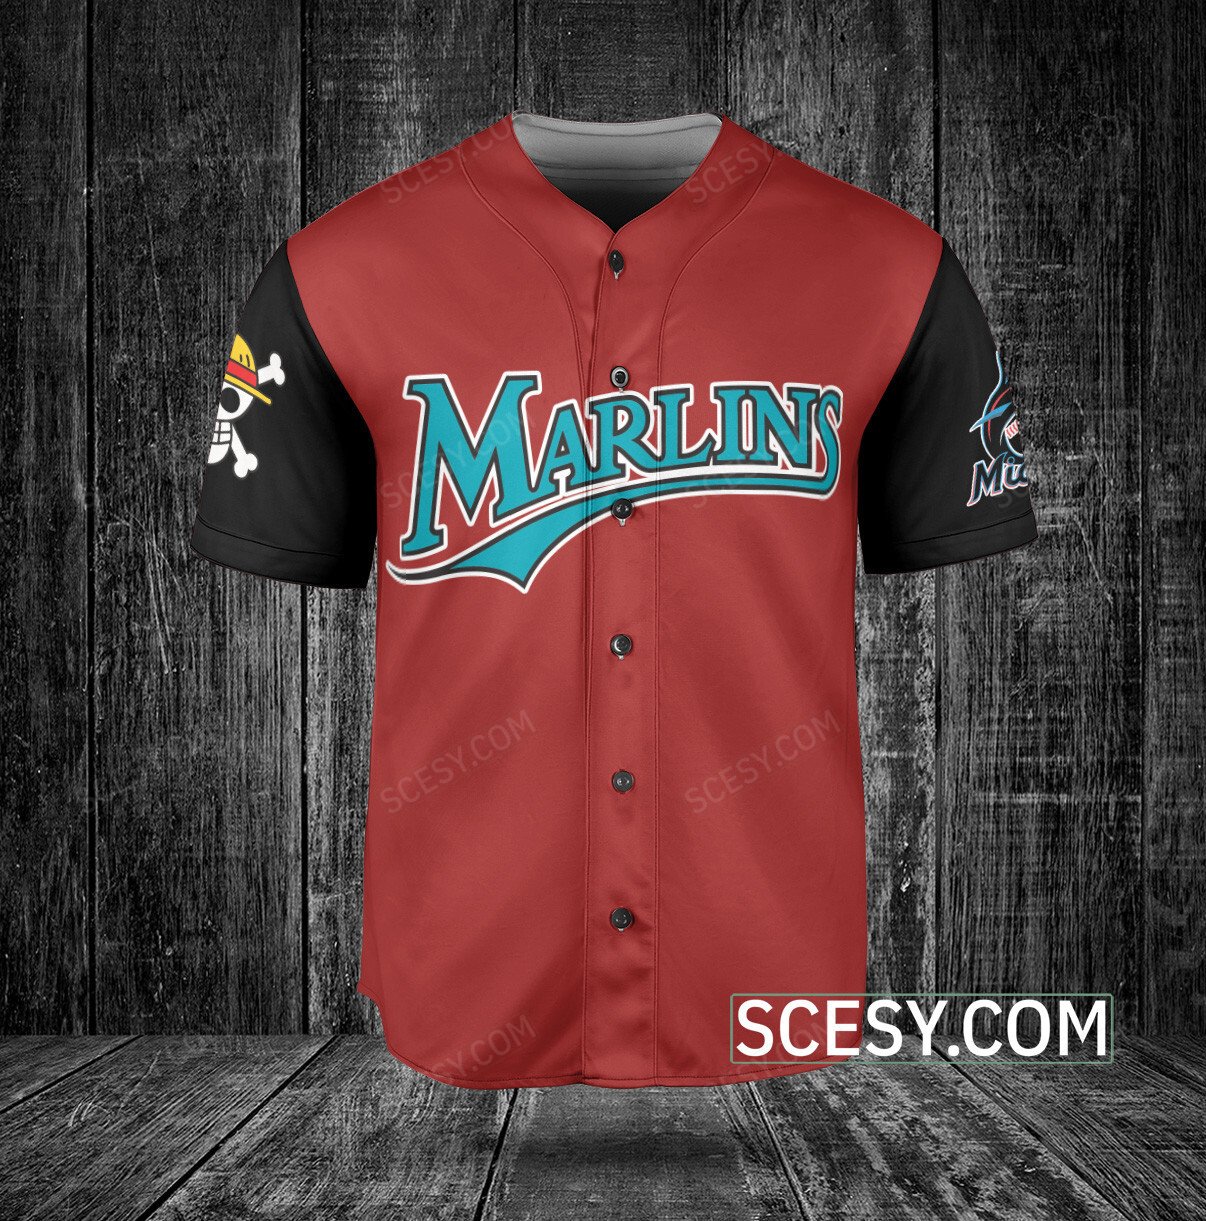 Miami Marlins One Piece Baseball Jersey Red - Scesy